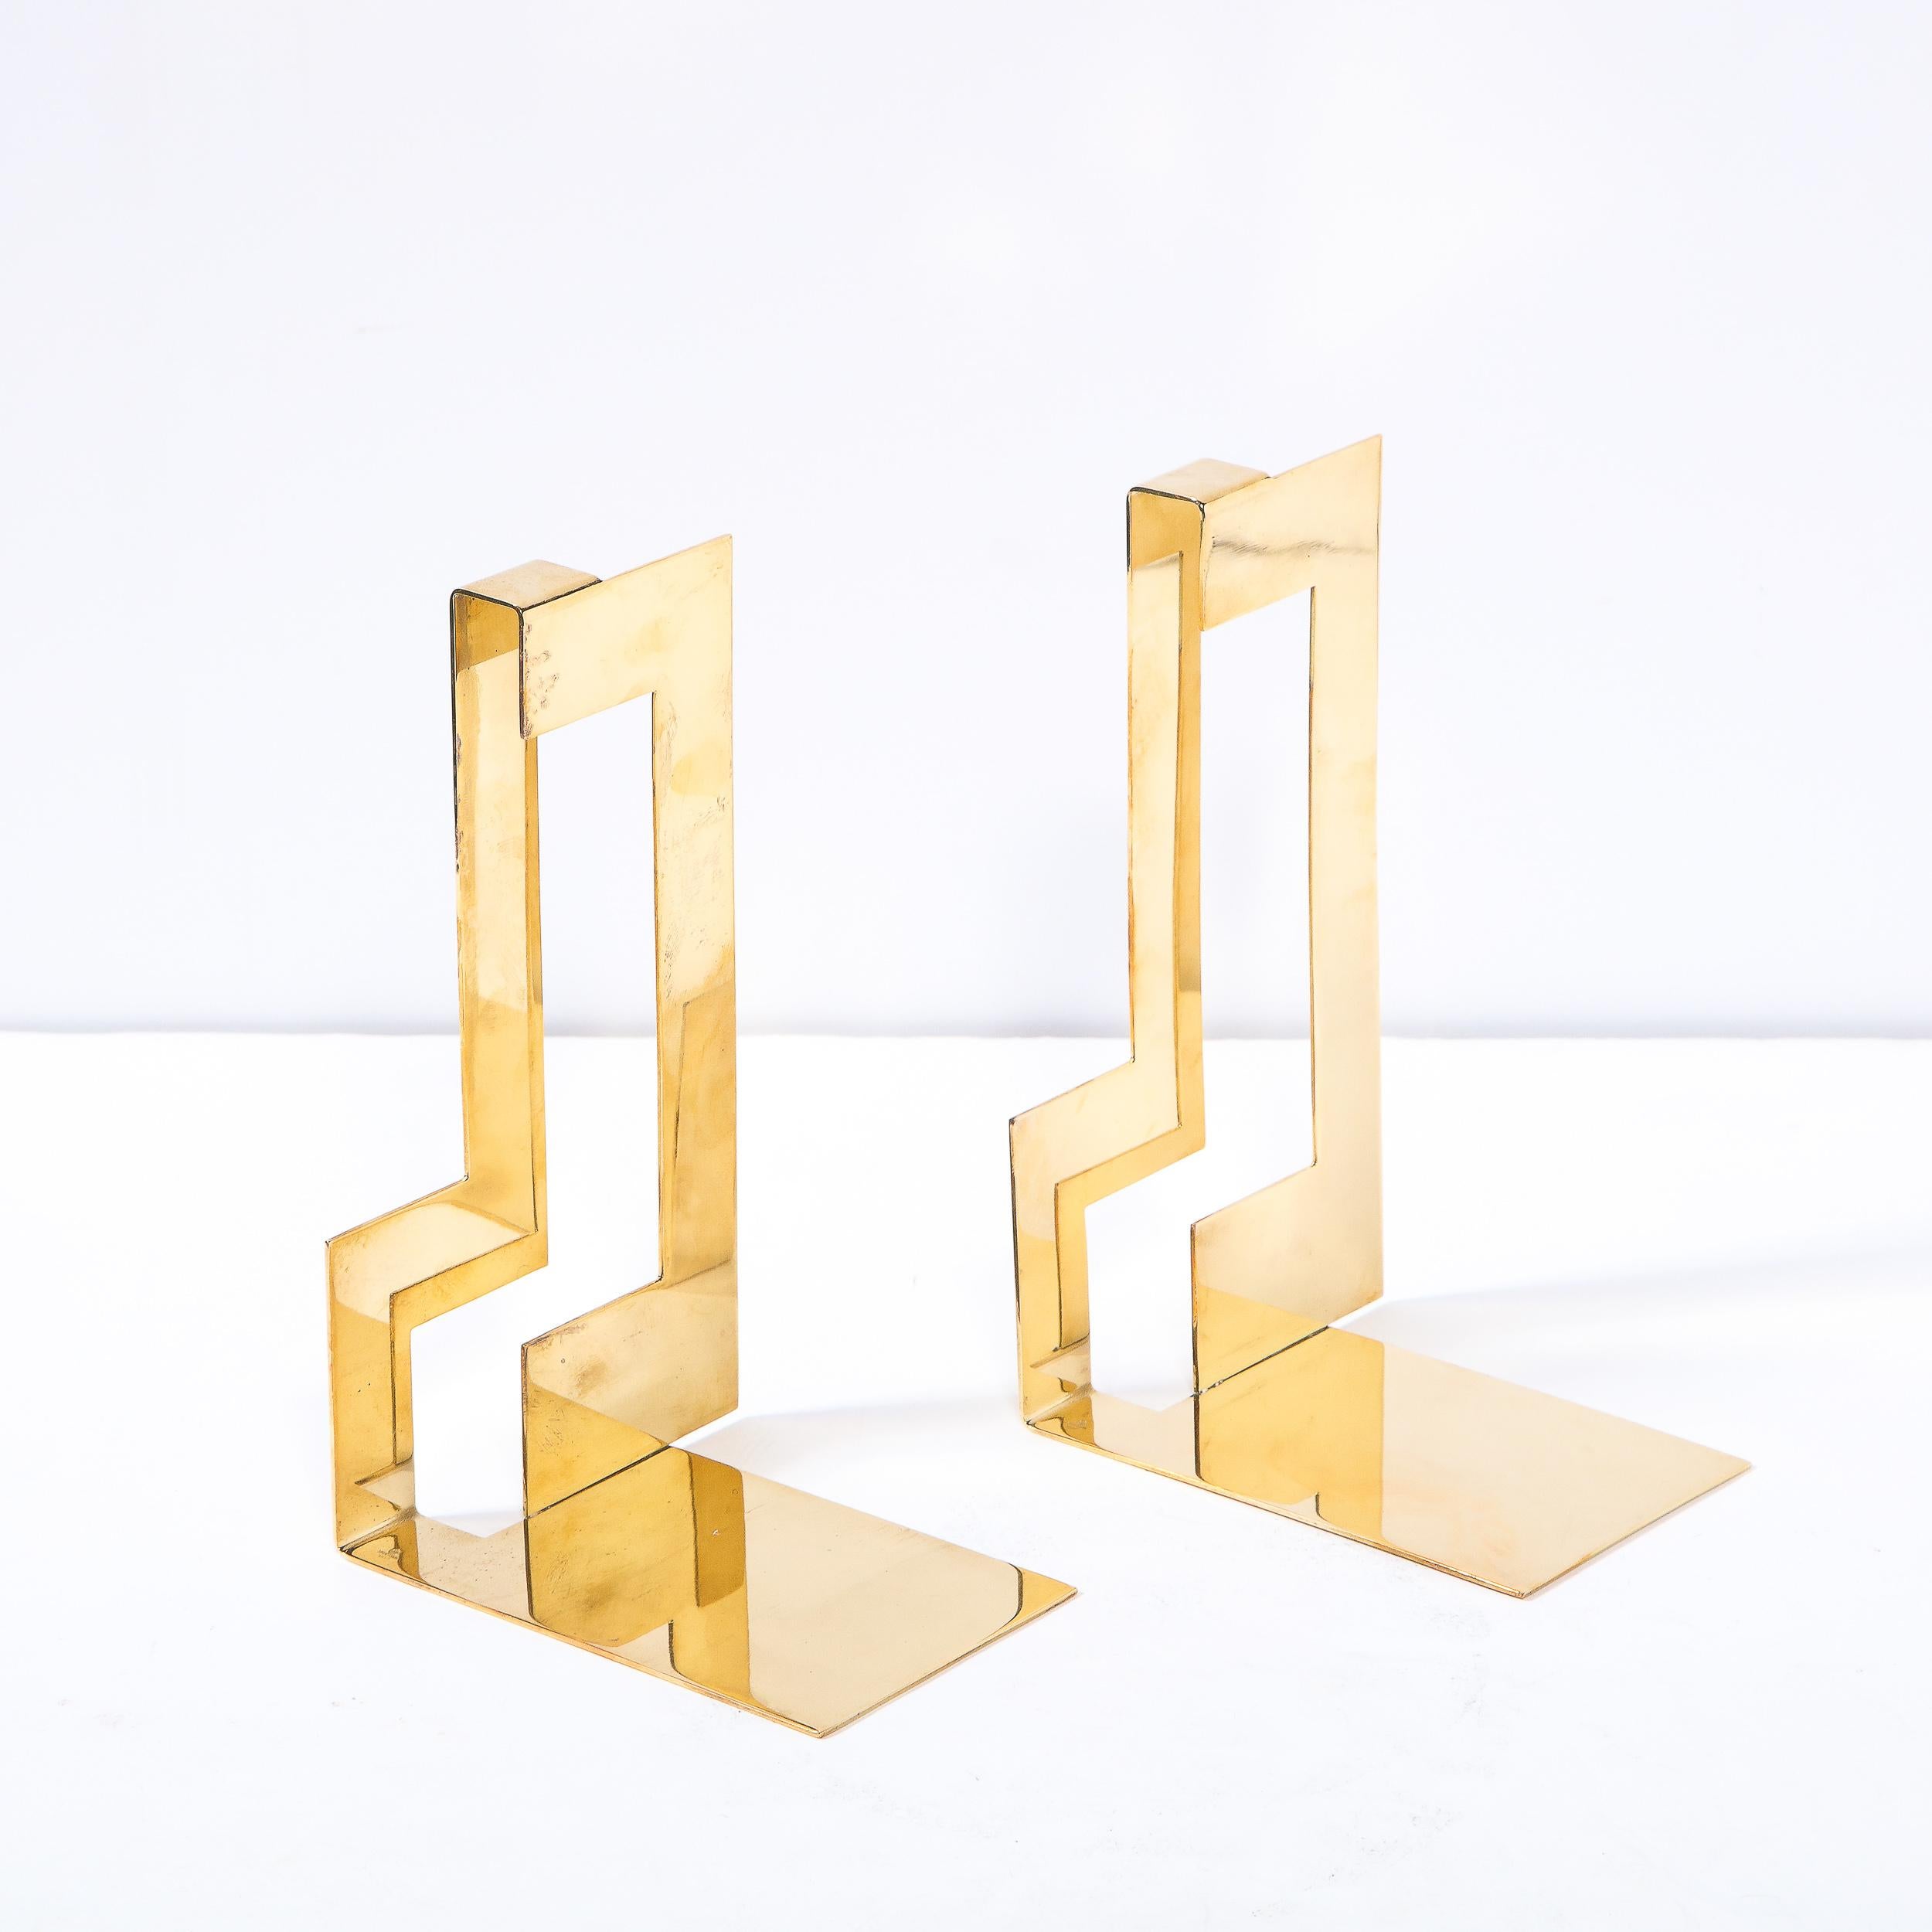 20th Century Pair of Scandinavian Modernist Polished Brass Rectilinear Bookends by Skultana For Sale